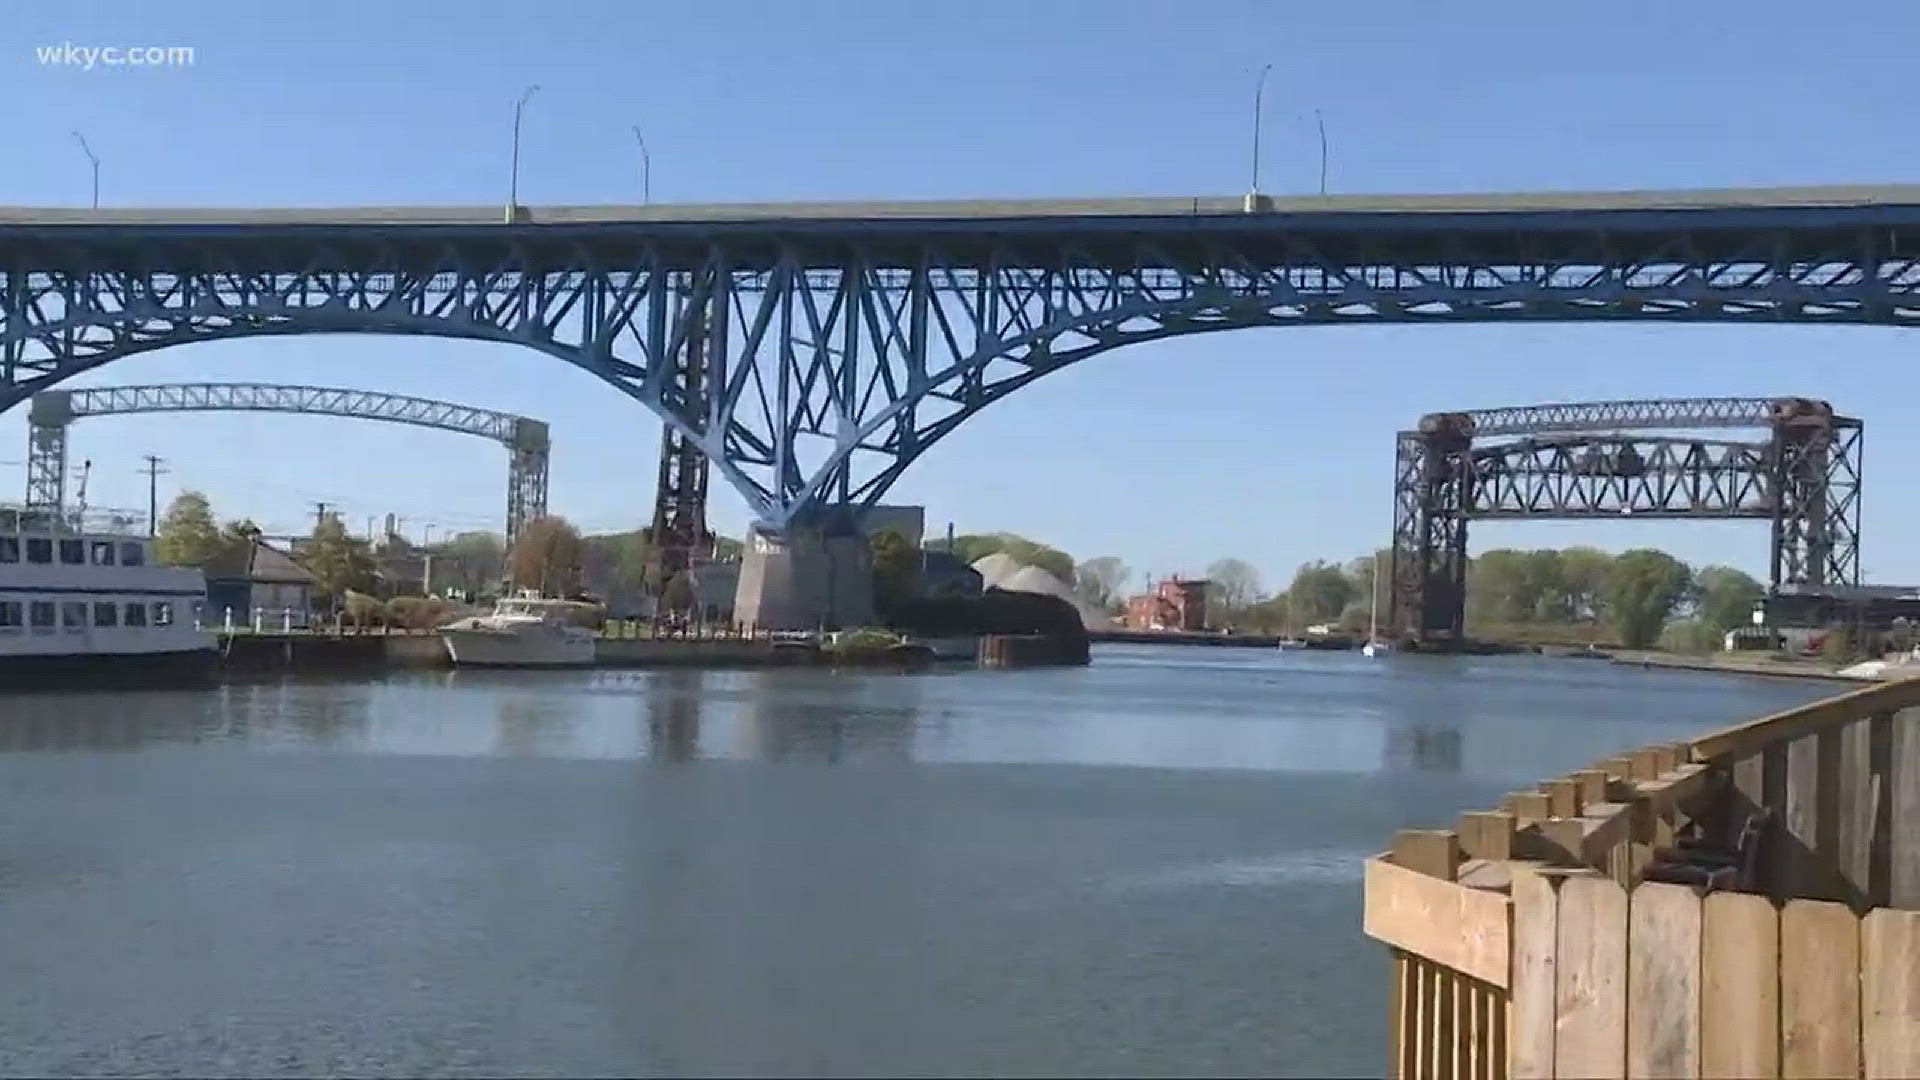 Cuts at EPA could affect efforts to clean up Cuyahoga River